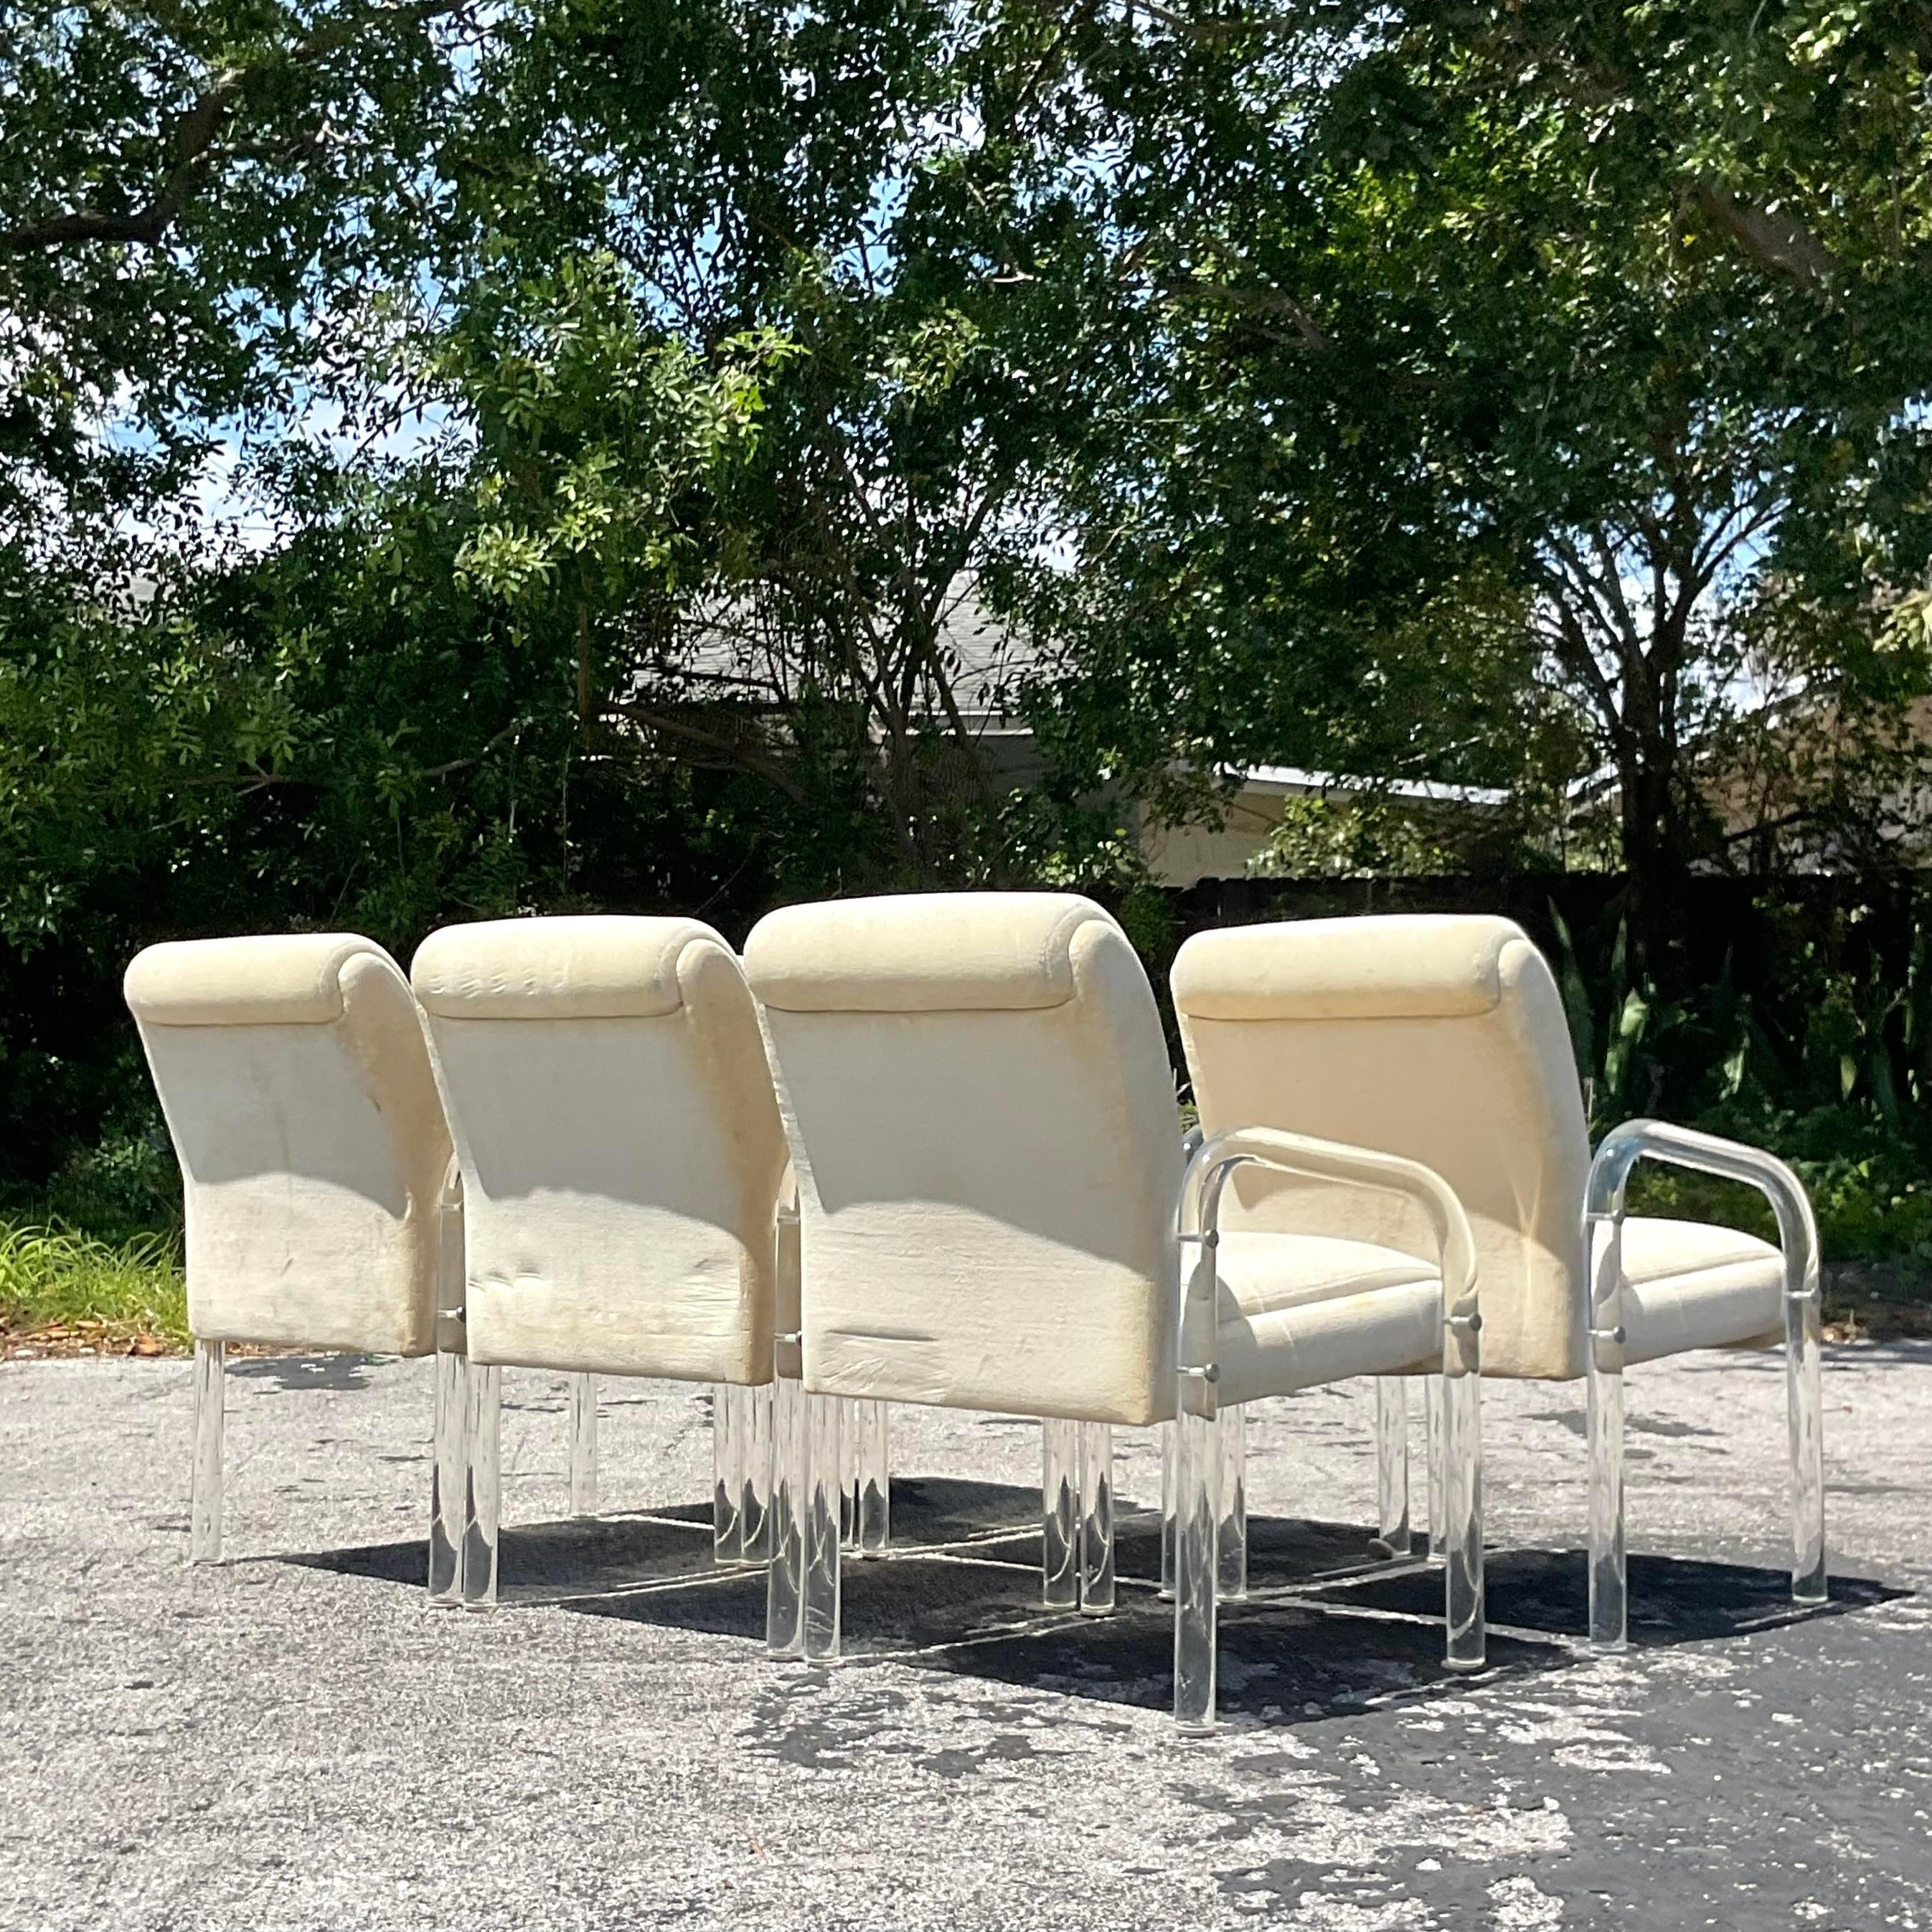 Upgrade your dining experience with our Vintage Contemporary Lucite Dining Chairs, inspired by Pace. Sold as a set of 6, these American-curated chairs showcase sleek lucite construction, blending modern design with timeless elegance for a